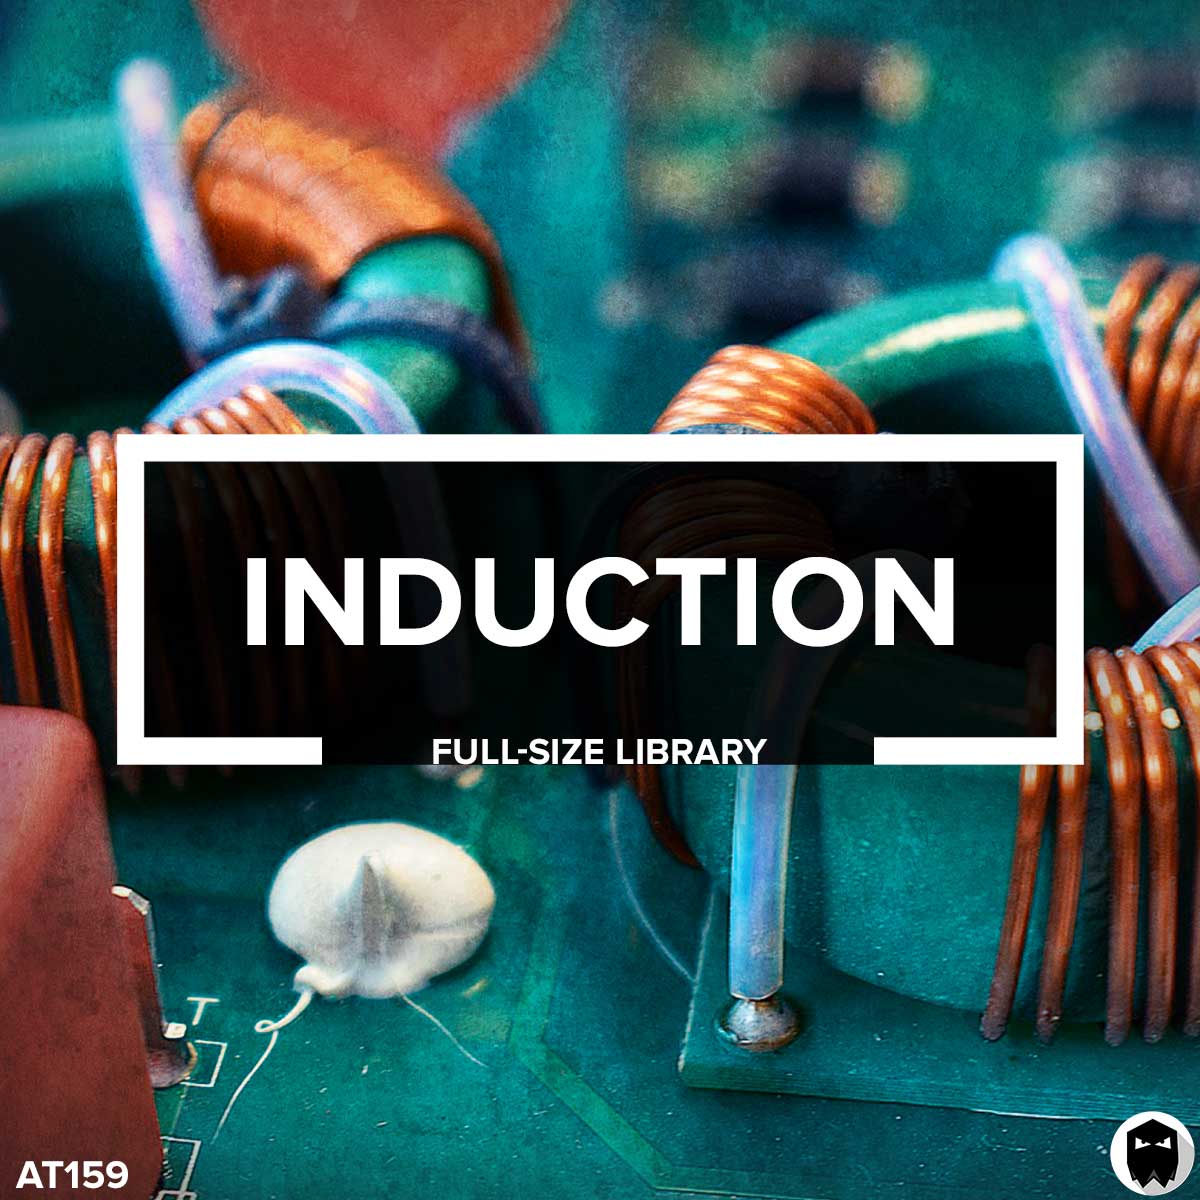 Induction // Full-Size Library